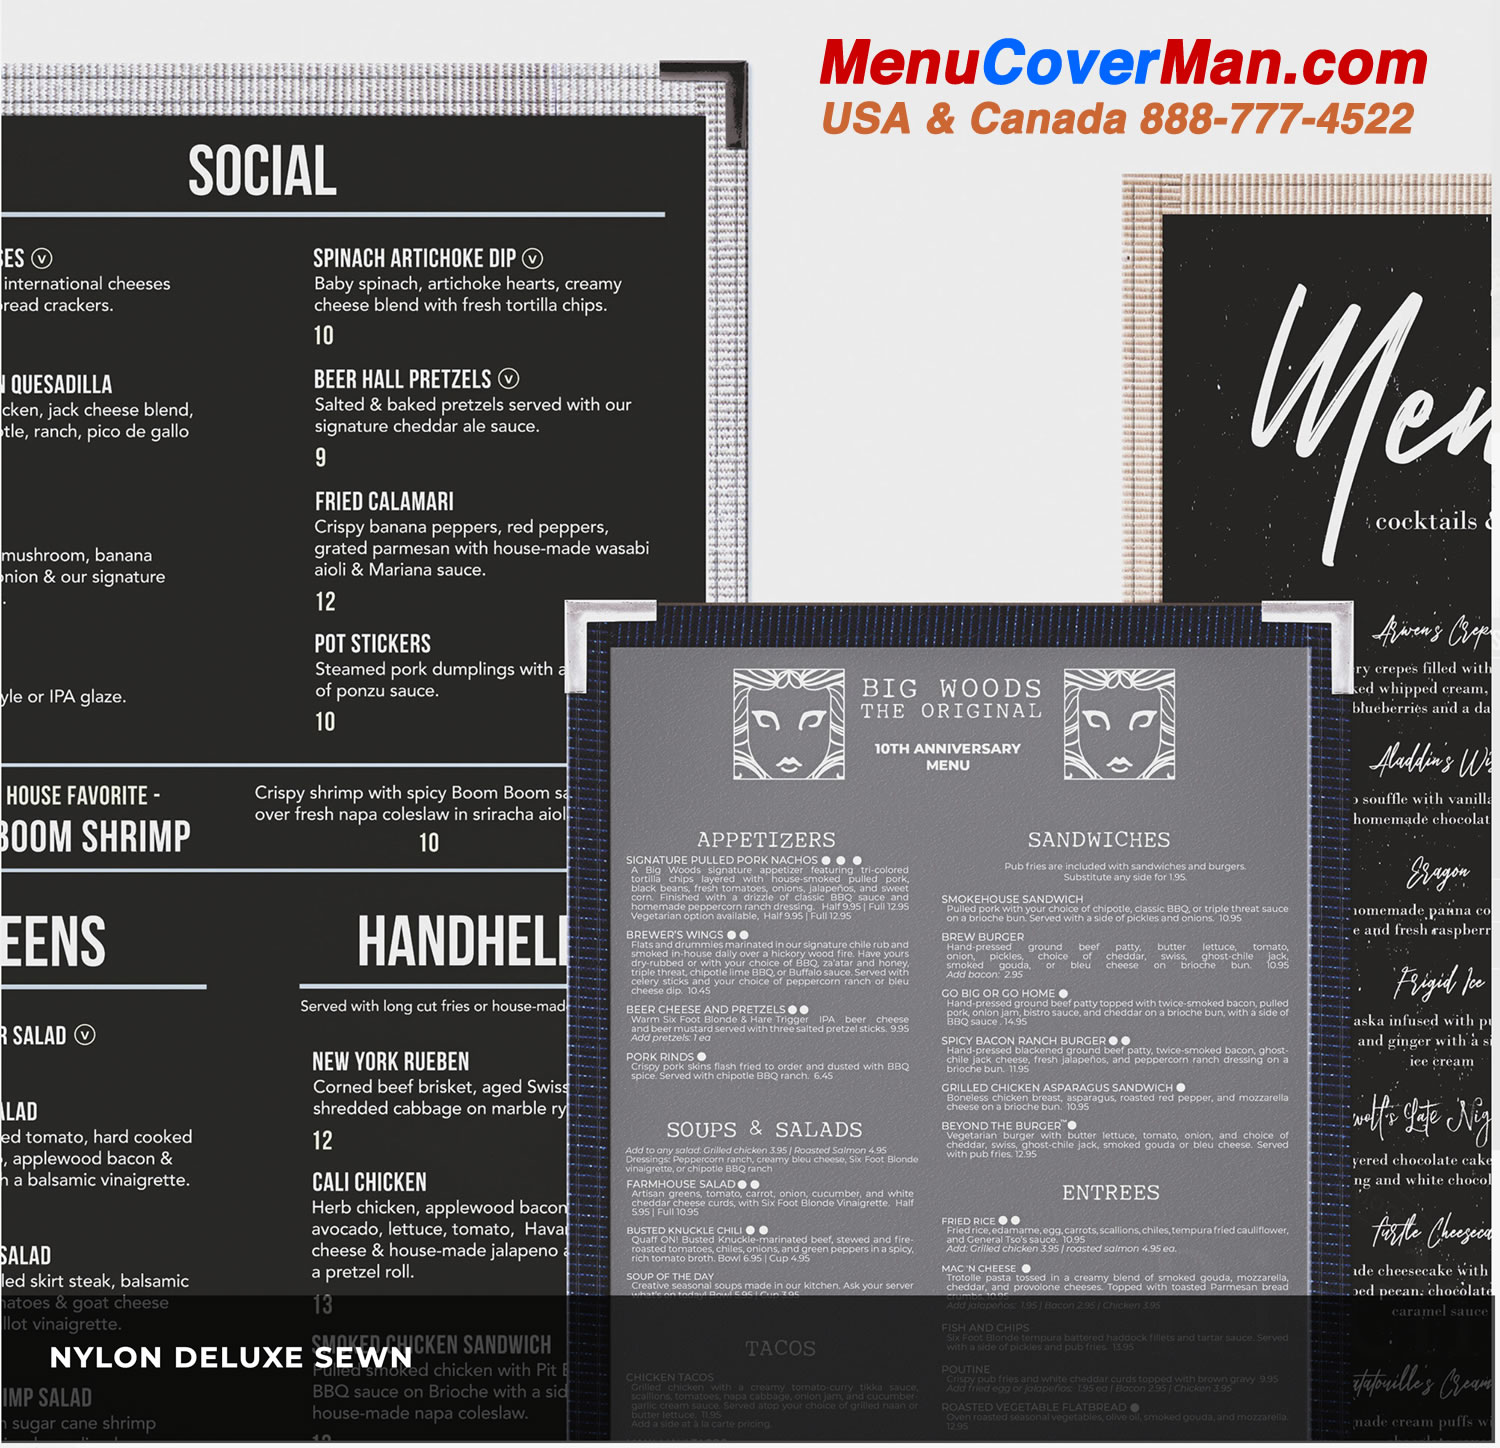 Menus for your restaurants, anywhere in North America.